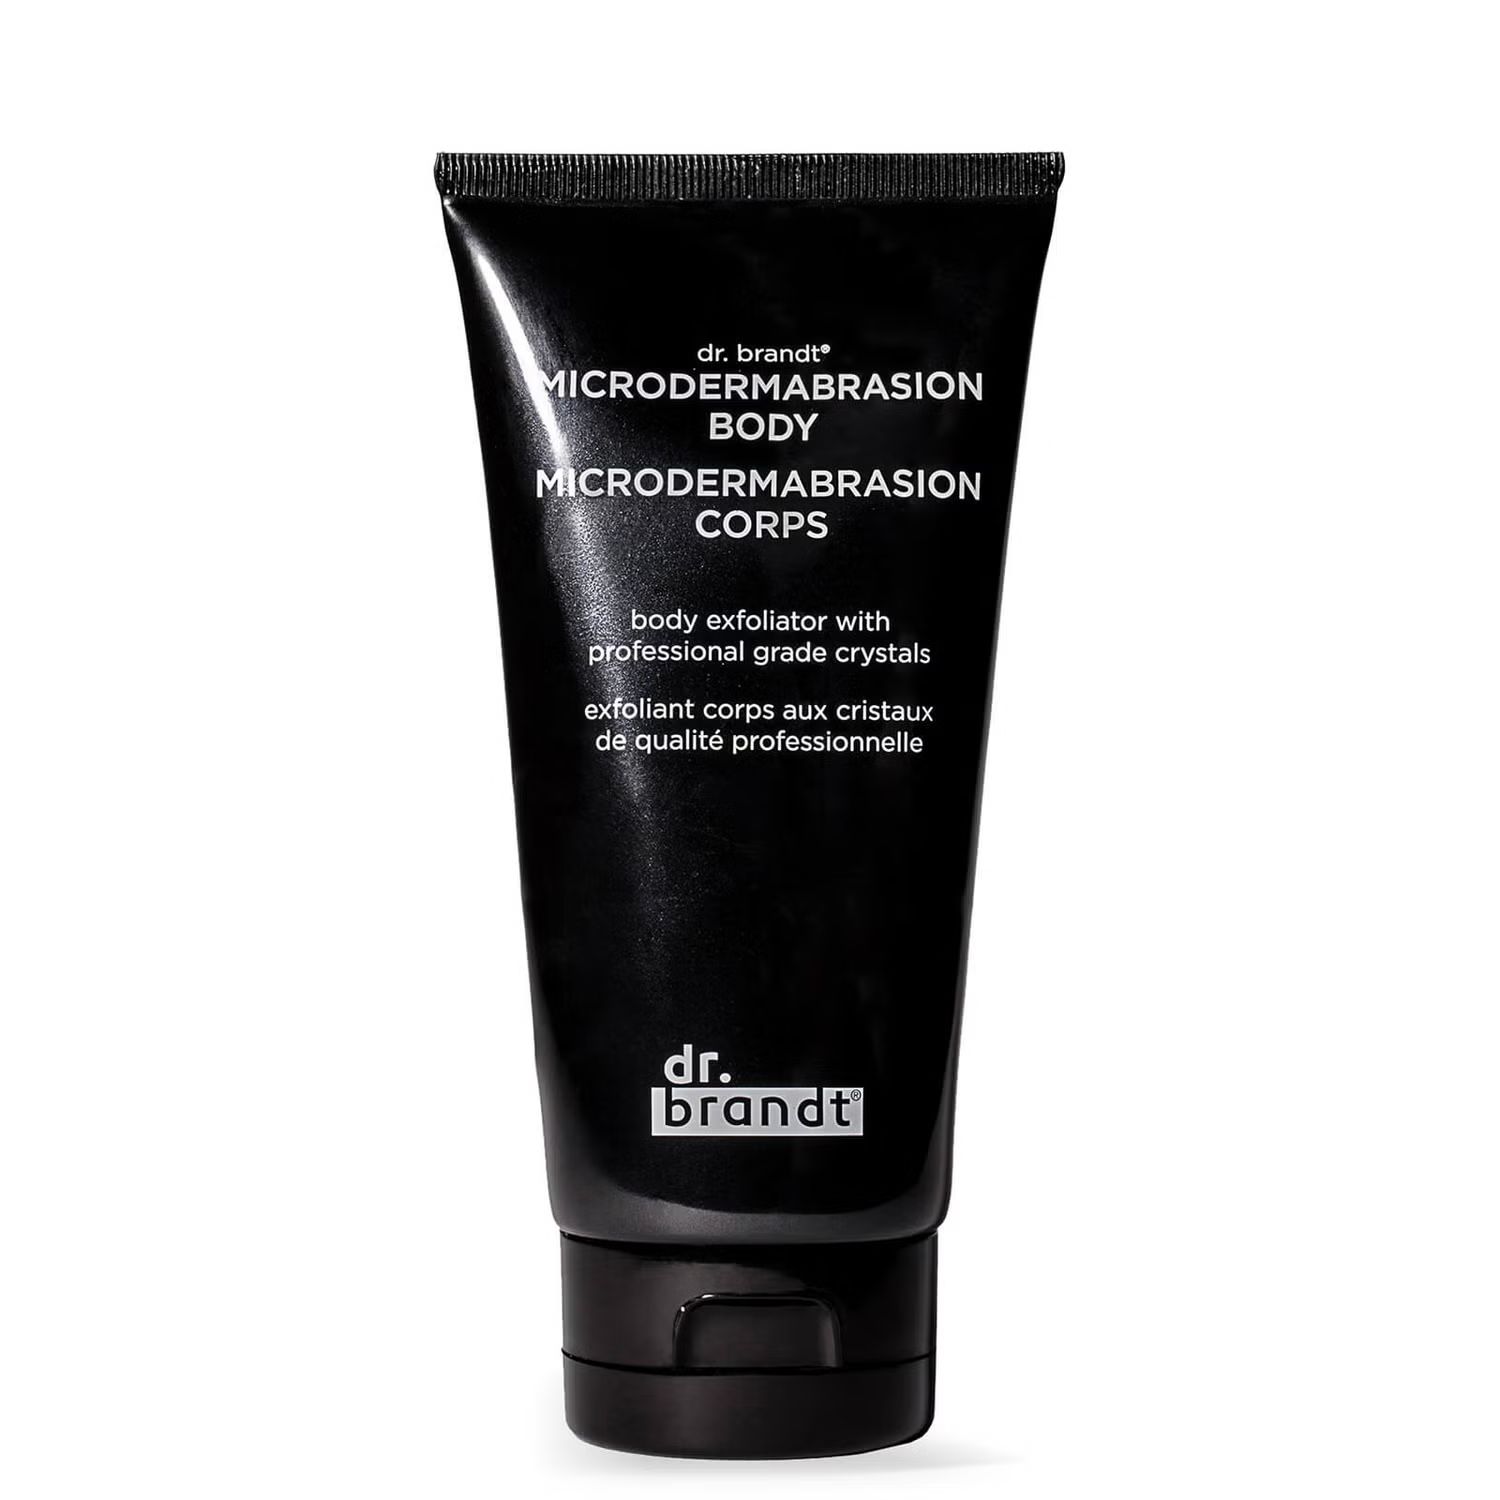 Dr. Brandt Microdermabrasion Body Body Exfoliator With Professional Grade Crystals 150g. | Dermstore